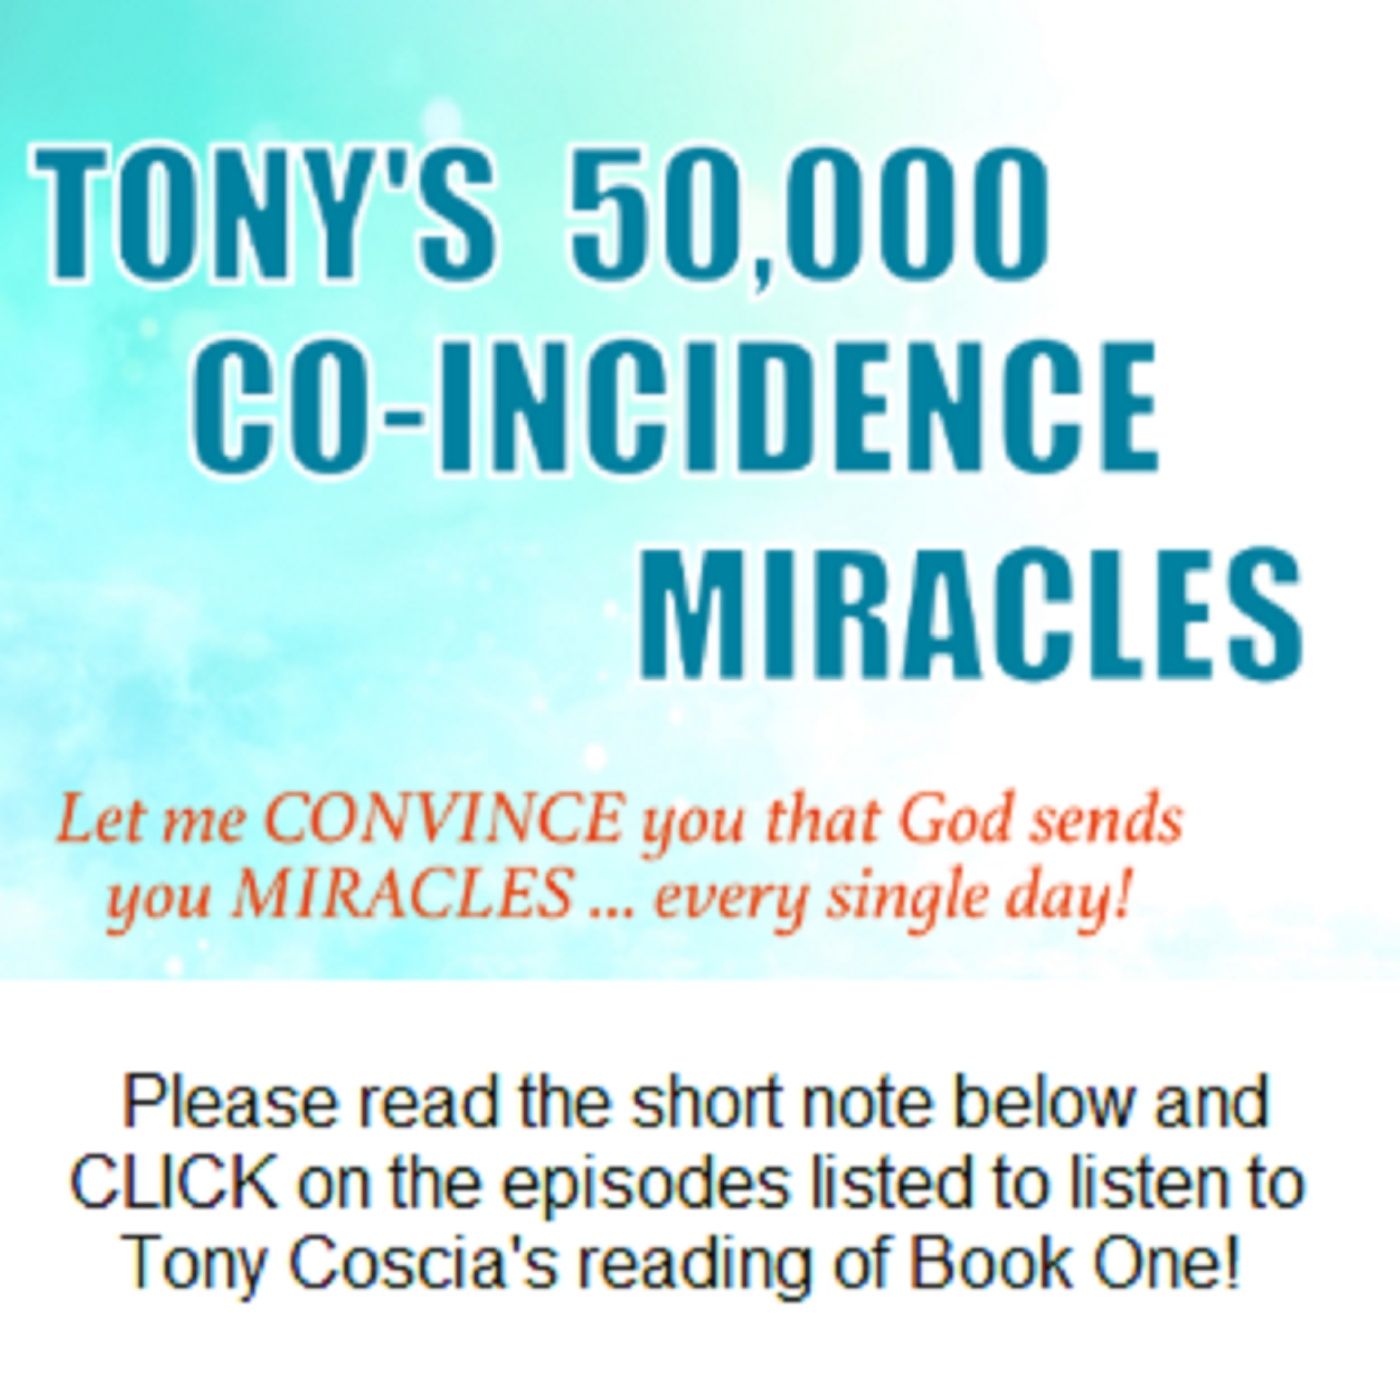 Episode 1: Introduction to Tony's 50,000 Co-Incidence Miracles